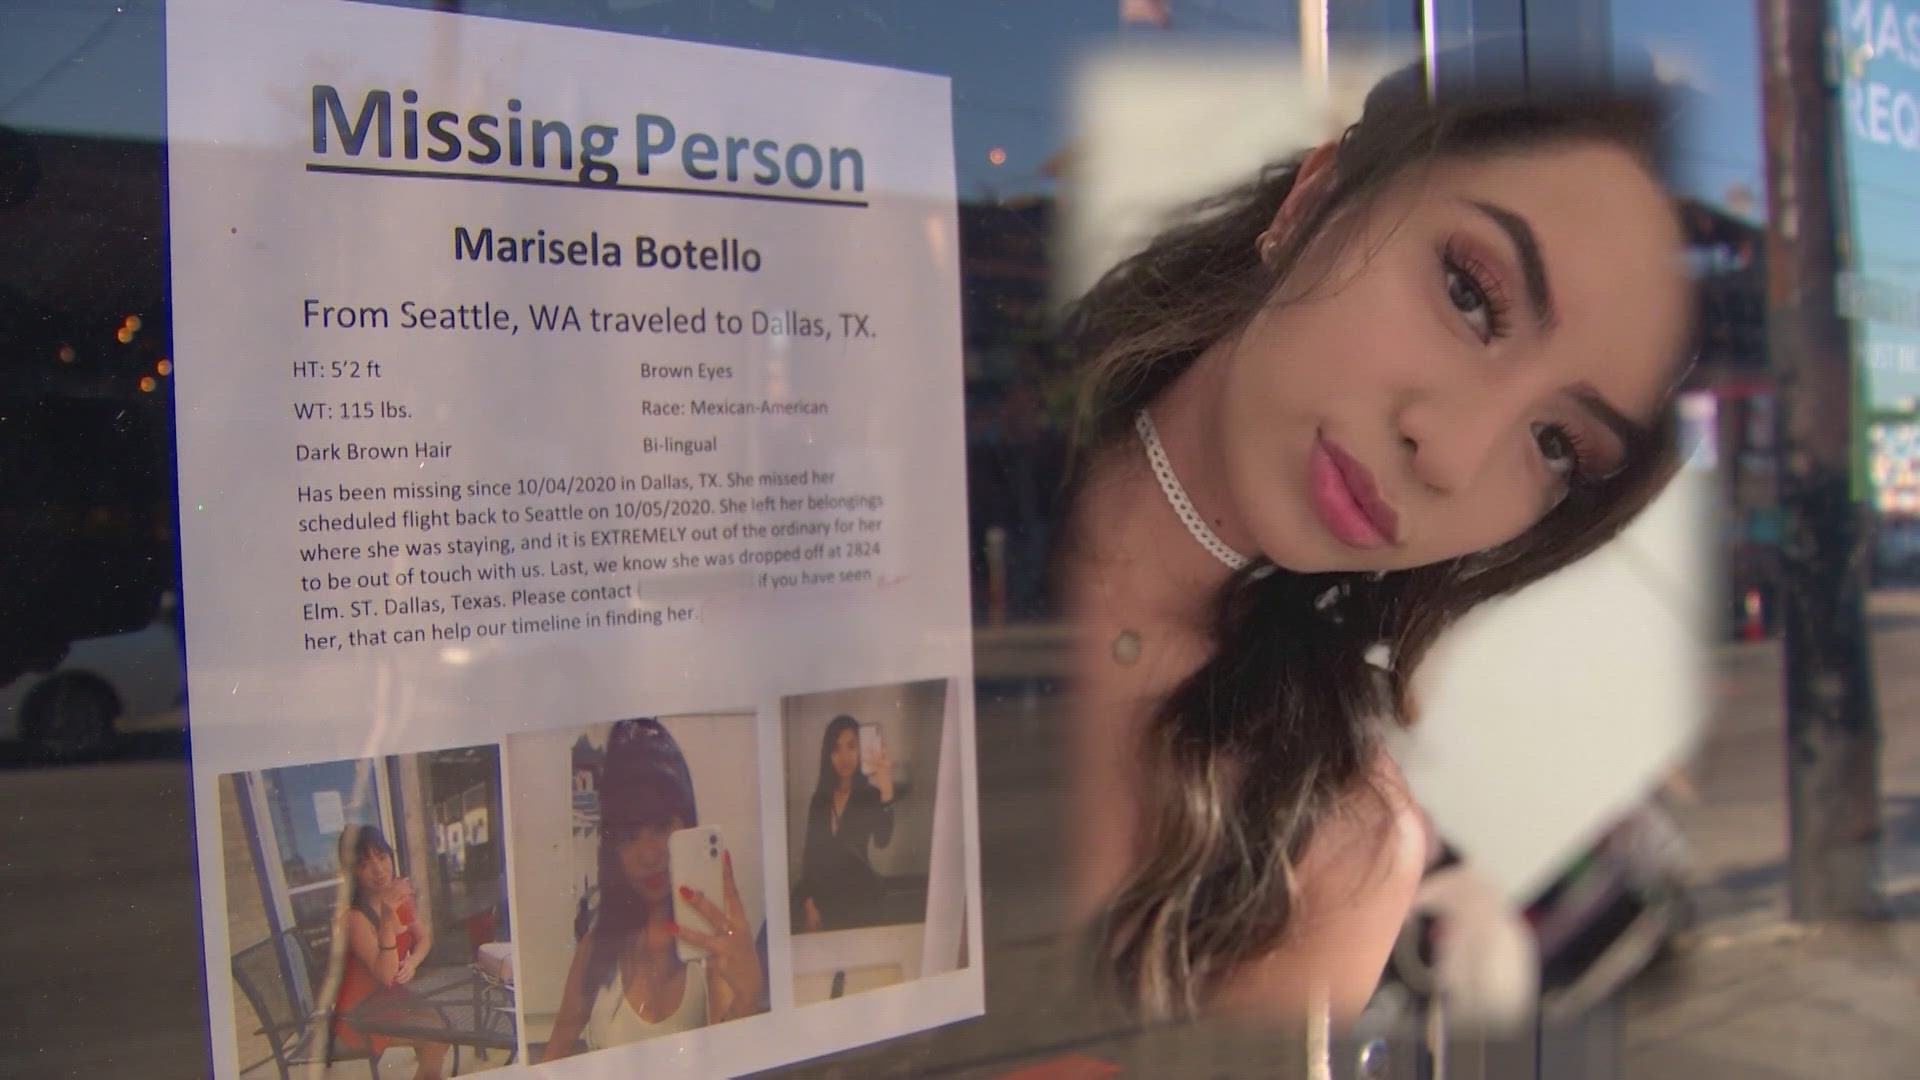 Three years ago, Marisela Botello-Valadez went missing in Dallas. After many delays, one of three people accused of murder is facing trial.